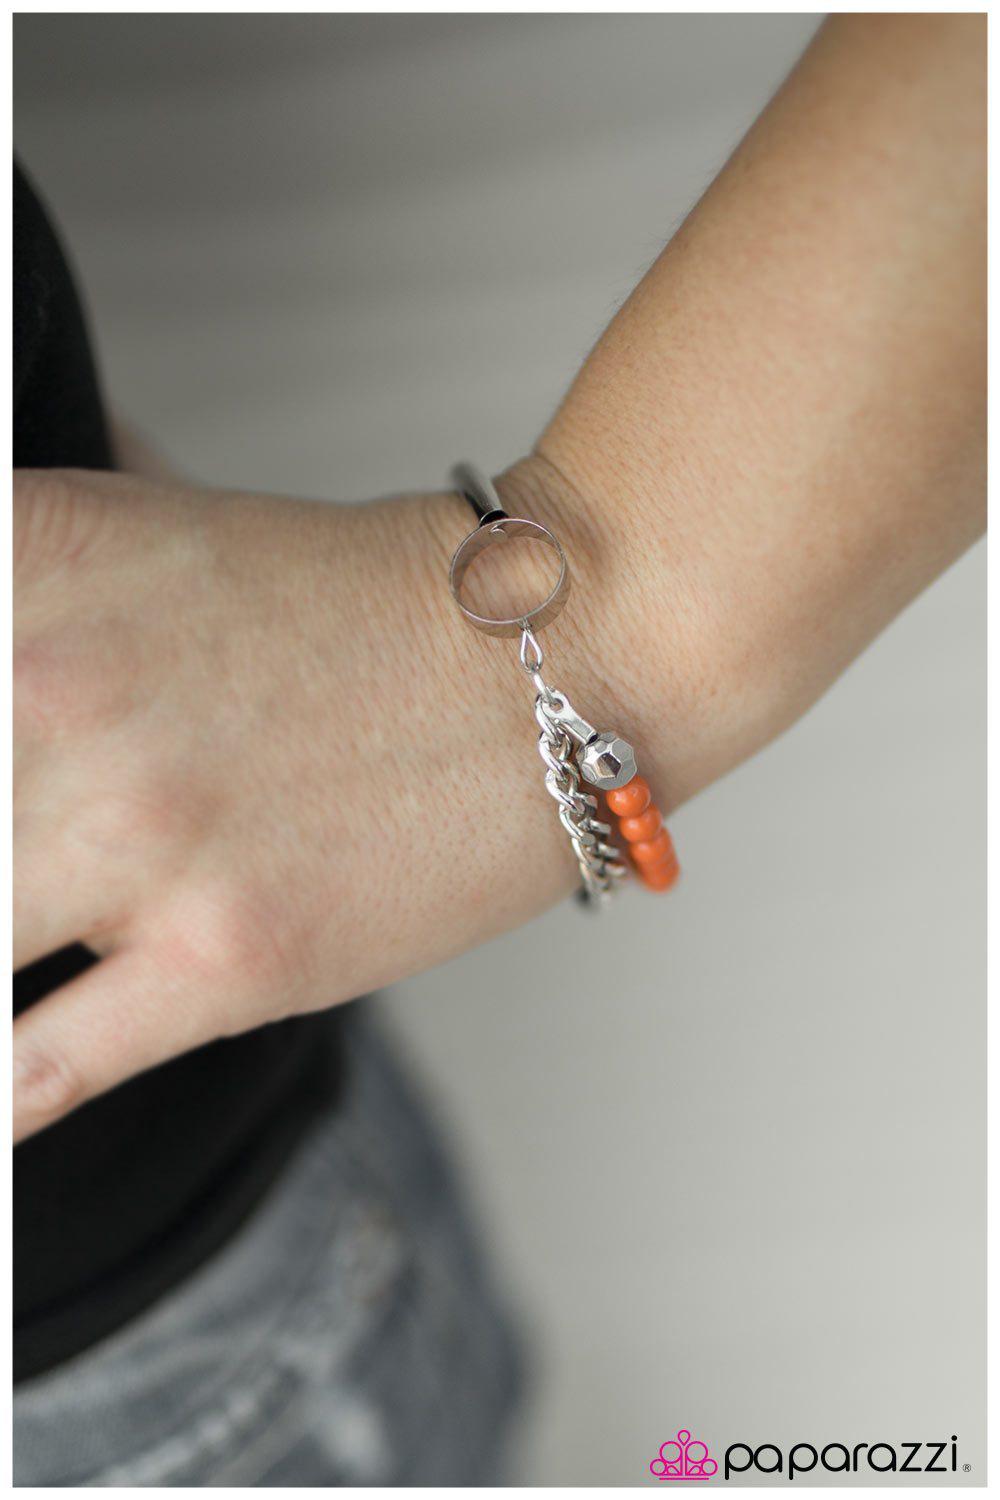 Wined and Dined Silver and Orange Bracelet - Paparazzi Accessories-CarasShop.com - $5 Jewelry by Cara Jewels